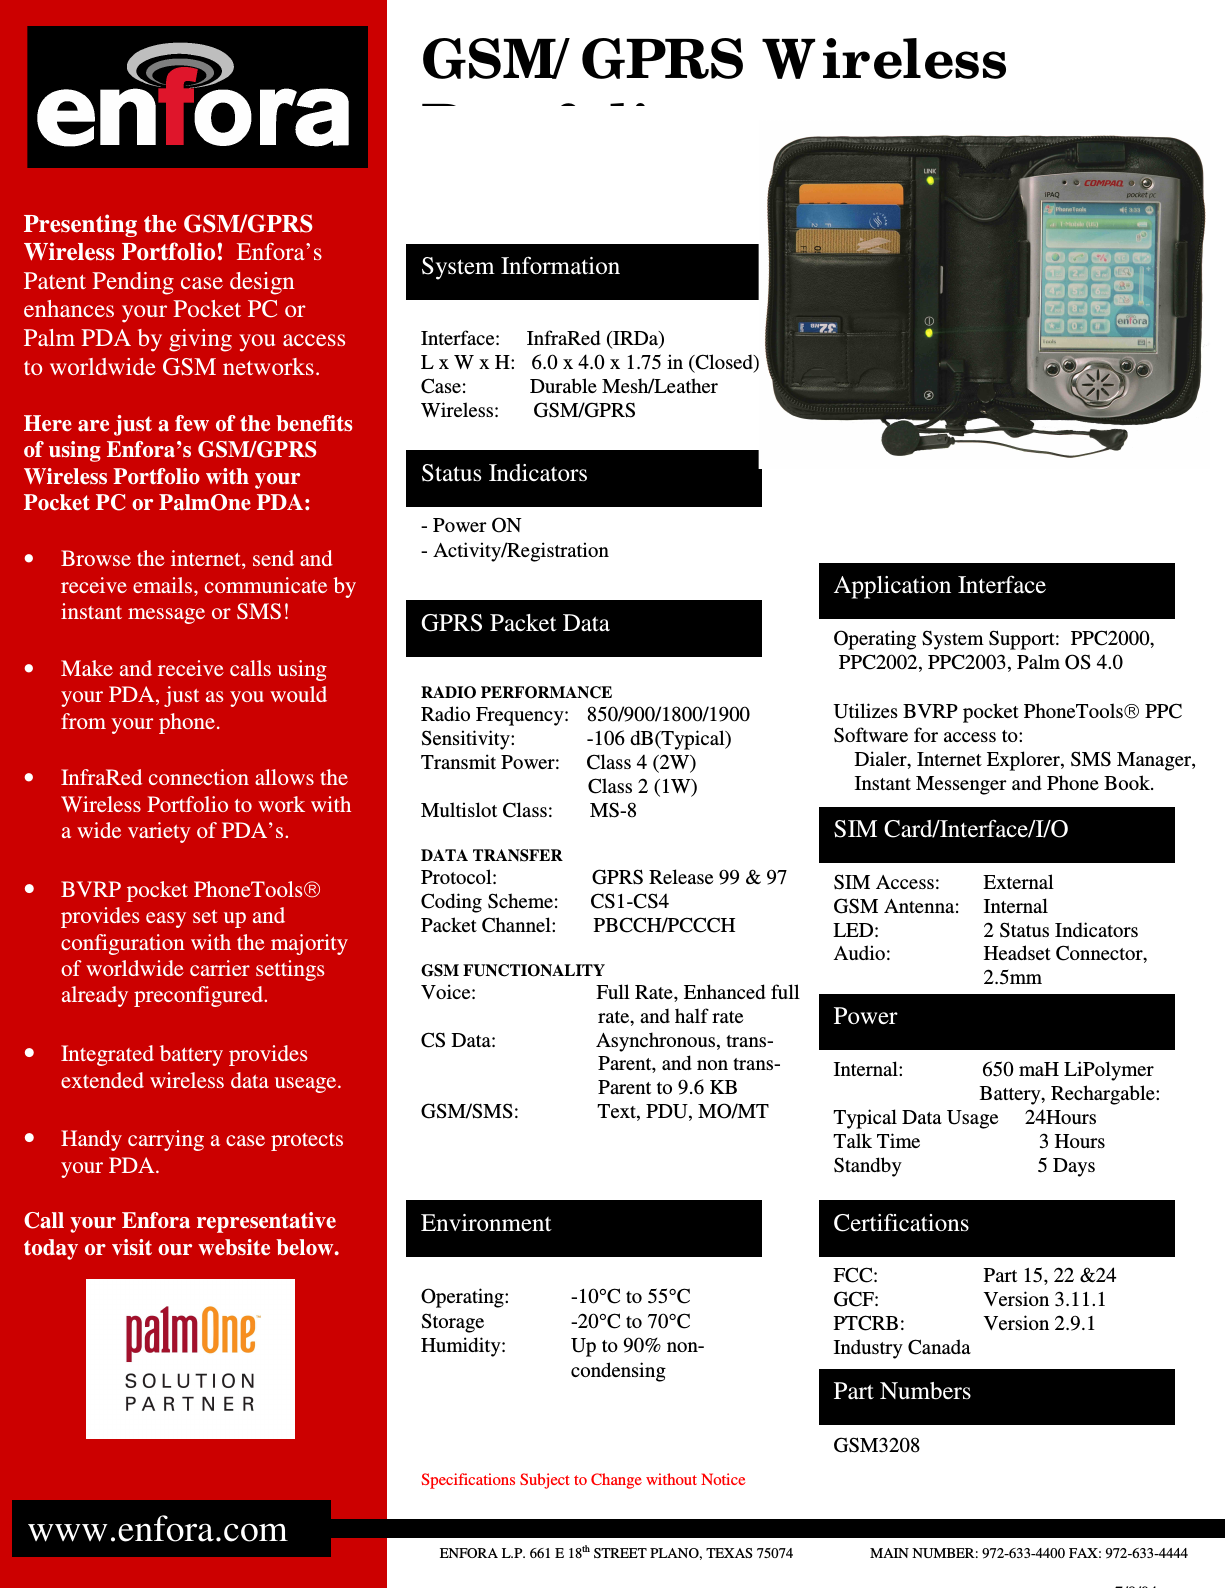                  Specifications Subject to Change without Notice             Presenting the GSM/GPRS Wireless Portfolio!  Enfora’s Patent Pending case design enhances your Pocket PC or Palm PDA by giving you access to worldwide GSM networks.  Here are just a few of the benefits of using Enfora’s GSM/GPRS Wireless Portfolio with your Pocket PC or PalmOne PDA:  •  Browse the internet, send and receive emails, communicate by instant message or SMS!  •  Make and receive calls using your PDA, just as you would from your phone.  •  InfraRed connection allows the Wireless Portfolio to work with a wide variety of PDA’s.  • BVRP pocket PhoneTools provides easy set up and configuration with the majority of worldwide carrier settings already preconfigured.  • Integrated battery provides extended wireless data useage.  • Handy carrying a case protects your PDA.  Call your Enfora representative today or visit our website below.    ENFORA L.P. 661 E 18th STREET PLANO, TEXAS 75074                     MAIN NUMBER: 972-633-4400 FAX: 972-633-4444  www.enfora.com GPRS Packet Data Environment  Certifications Part Numbers Interface:     InfraRed (IRDa) L x W x H:   6.0 x 4.0 x 1.75 in (Closed) Case:            Durable Mesh/Leather Wireless:  GSM/GPRS Operating System Support:  PPC2000,  PPC2002, PPC2003, Palm OS 4.0  Utilizes BVRP pocket PhoneTools PPC Software for access to:     Dialer, Internet Explorer, SMS Manager,      Instant Messenger and Phone Book.  FCC:    Part 15, 22 &amp;24 GCF:    Version 3.11.1 PTCRB:   Version 2.9.1 Industry Canada - Power ON - Activity/Registration Operating:  -10°C to 55°C Storage    -20°C to 70°C Humidity:  Up to 90% non-condensing SIM Access:  External GSM Antenna:  Internal LED:    2 Status Indicators Audio:    Headset Connector, 2.5mm GSM3208 Power Internal:               650 maH LiPolymer                                                  Battery, Rechargable: Typical Data Usage     24Hours Talk Time           3 Hours Standby                          5 Days  SIM Card/Interface/I/O Status Indicators System Information    GSM/ GPRS W ireless Portfolio Application Interface  RADIO PERFORMANCE Radio Frequency:    850/900/1800/1900 Sensitivity:     -106 dB(Typical) Transmit Power:     Class 4 (2W)                                 Class 2 (1W) Multislot Class:       MS-8  DATA TRANSFER Protocol:      GPRS Release 99 &amp; 97 Coding Scheme:      CS1-CS4 Packet Channel:       PBCCH/PCCCH  GSM FUNCTIONALITY Voice:                       Full Rate, Enhanced full                                   rate, and half rate CS Data:                   Asynchronous, trans-                                   Parent, and non trans-                                   Parent to 9.6 KB GSM/SMS:               Text, PDU, MO/MT   7/8/04 